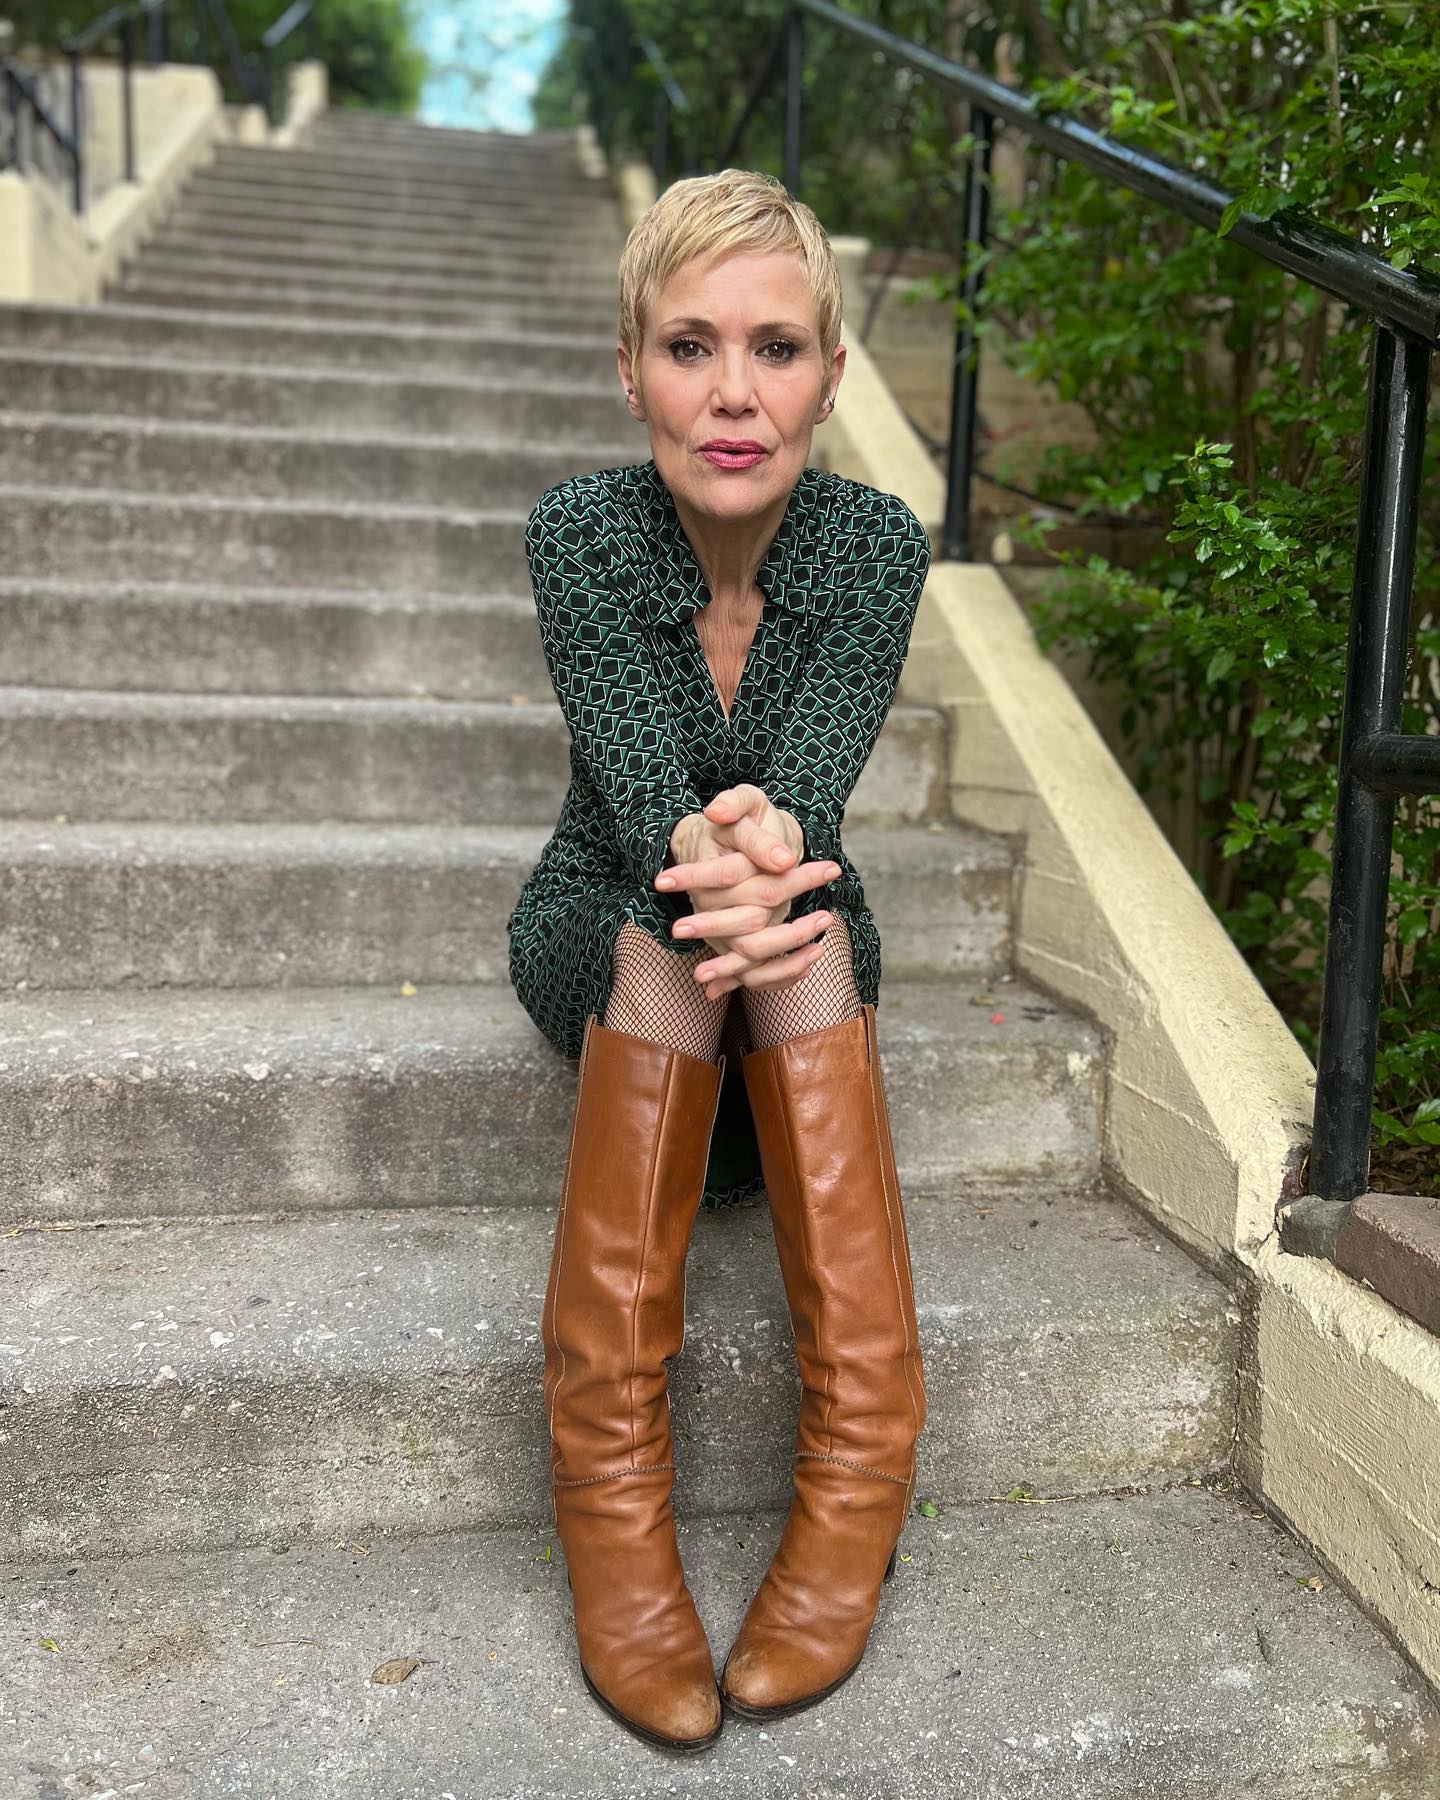 Photo by Constantina Mihail⭐ on April 26 2023. May be an image of 1 person blonde hair makeup and boots